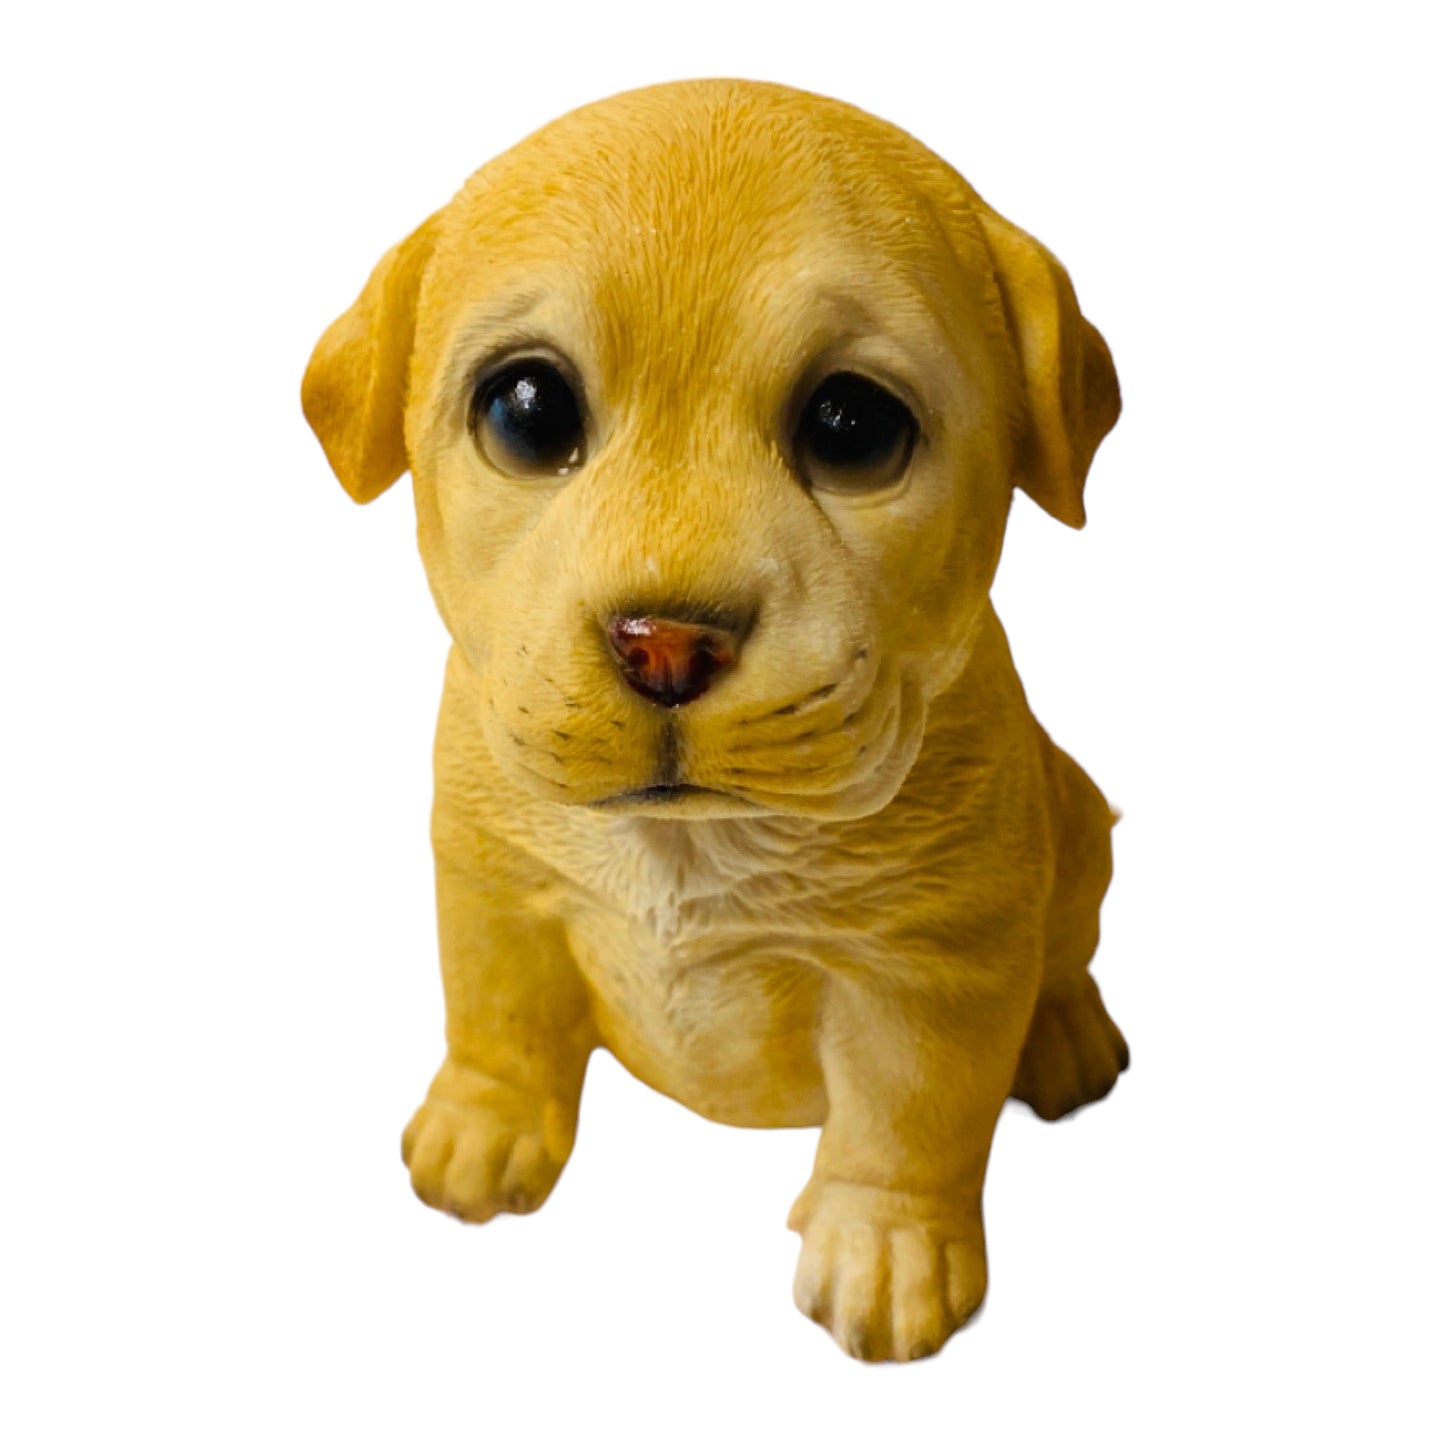 Dog Puppy Golden Labrador Ornament - The Renmy Store Homewares & Gifts 